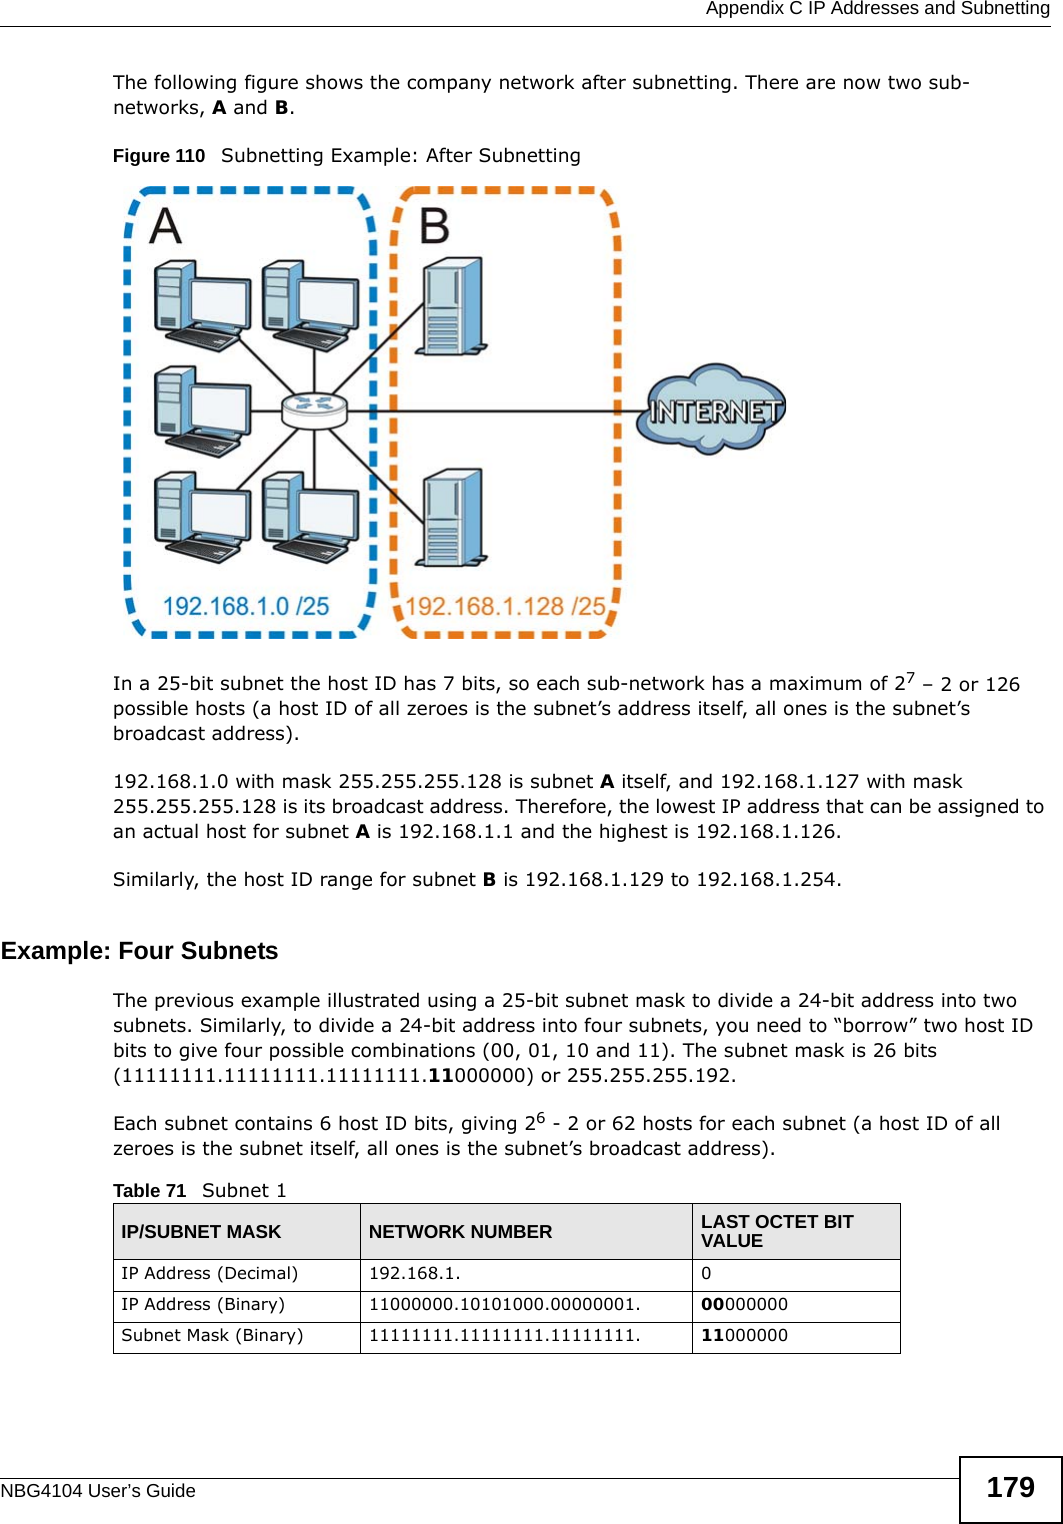  Appendix C IP Addresses and SubnettingNBG4104 User’s Guide 179The following figure shows the company network after subnetting. There are now two sub-networks, A and B. Figure 110   Subnetting Example: After SubnettingIn a 25-bit subnet the host ID has 7 bits, so each sub-network has a maximum of 27 – 2 or 126 possible hosts (a host ID of all zeroes is the subnet’s address itself, all ones is the subnet’s broadcast address).192.168.1.0 with mask 255.255.255.128 is subnet A itself, and 192.168.1.127 with mask 255.255.255.128 is its broadcast address. Therefore, the lowest IP address that can be assigned to an actual host for subnet A is 192.168.1.1 and the highest is 192.168.1.126. Similarly, the host ID range for subnet B is 192.168.1.129 to 192.168.1.254.Example: Four Subnets The previous example illustrated using a 25-bit subnet mask to divide a 24-bit address into two subnets. Similarly, to divide a 24-bit address into four subnets, you need to “borrow” two host ID bits to give four possible combinations (00, 01, 10 and 11). The subnet mask is 26 bits (11111111.11111111.11111111.11000000) or 255.255.255.192. Each subnet contains 6 host ID bits, giving 26 - 2 or 62 hosts for each subnet (a host ID of all zeroes is the subnet itself, all ones is the subnet’s broadcast address). Table 71   Subnet 1IP/SUBNET MASK NETWORK NUMBER LAST OCTET BIT VALUEIP Address (Decimal) 192.168.1. 0IP Address (Binary) 11000000.10101000.00000001. 00000000Subnet Mask (Binary) 11111111.11111111.11111111. 11000000